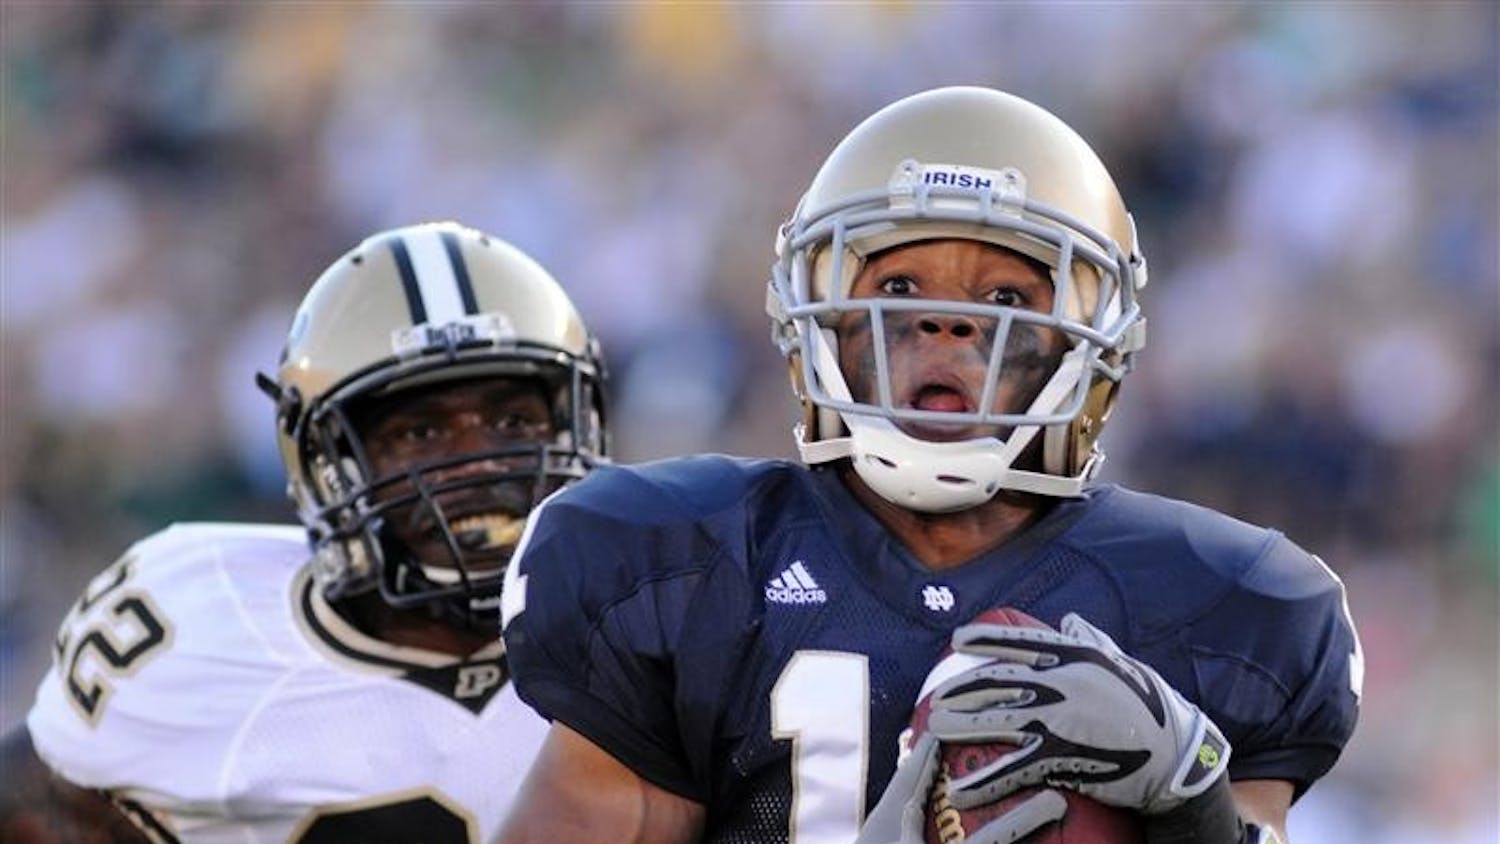 Notre Dame wide receiver David Grimes, front, heads for the end zone with a touchdown as Purdue safety Dwight Mclean gives chase during third-quarter action in an NCAA college football game Saturday, Sept. 27, 2008, in South Bend, Ind.